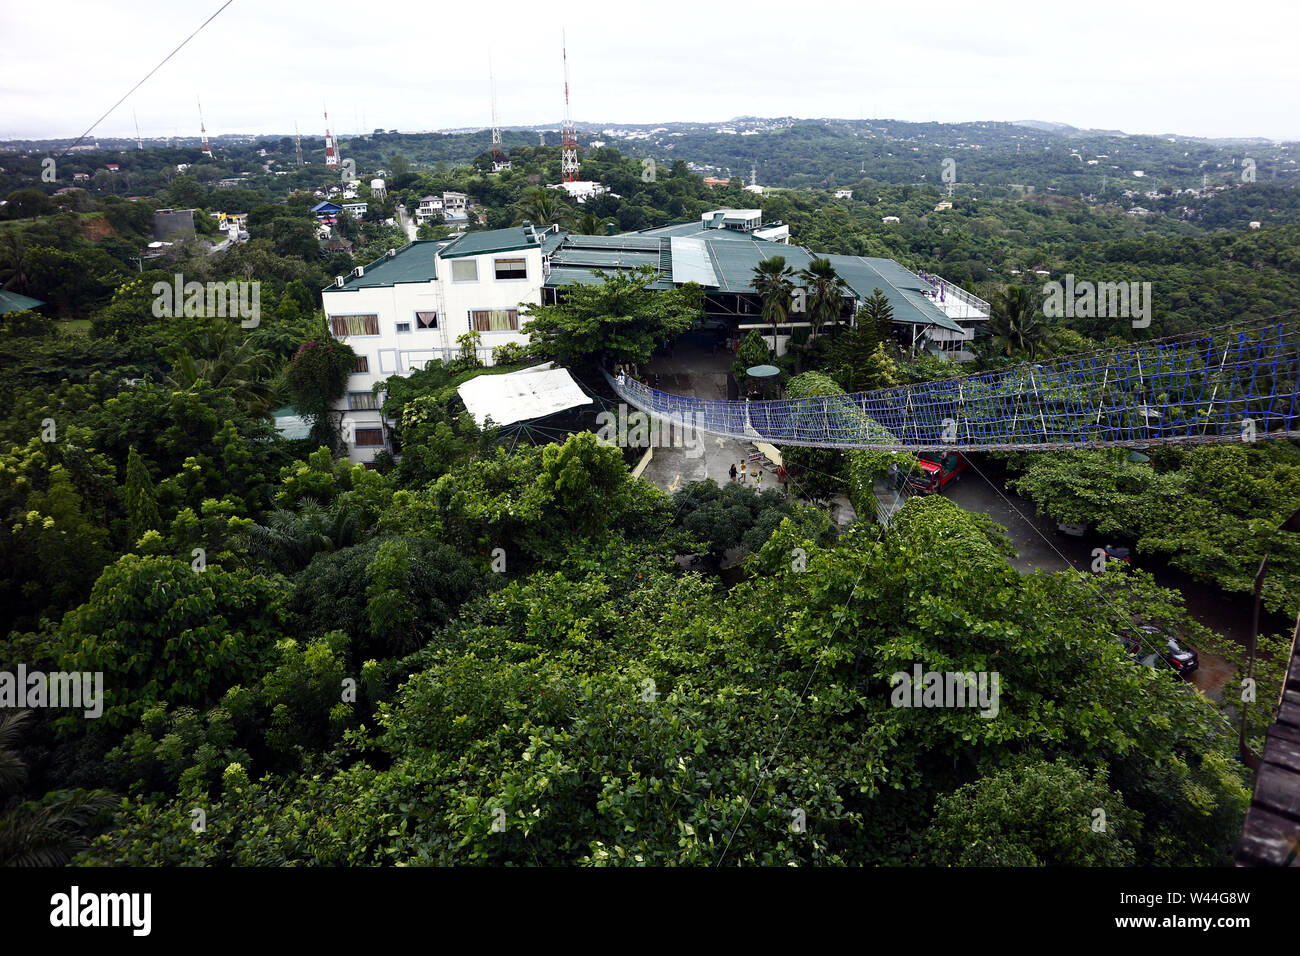 ANTIPOLO CITY, PHILIPPINES – JULY 17, 2019: Hanging bridge which leads to a 360 degree viewing deck at a restaurant and tourist destination in Antipol Stock Photo